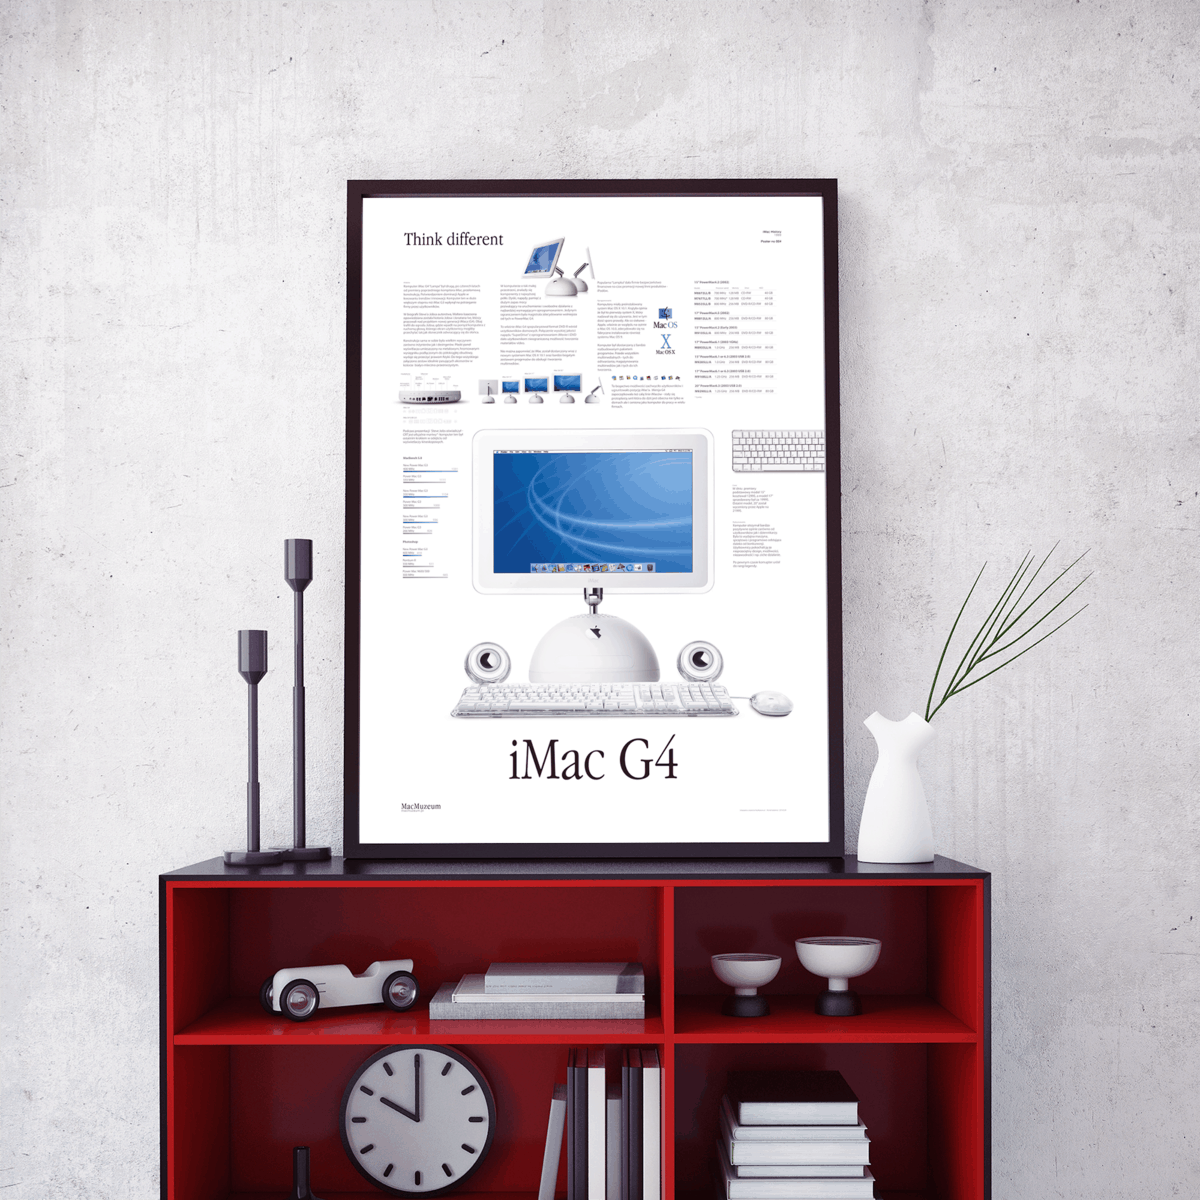 iMac G4 infographic poster